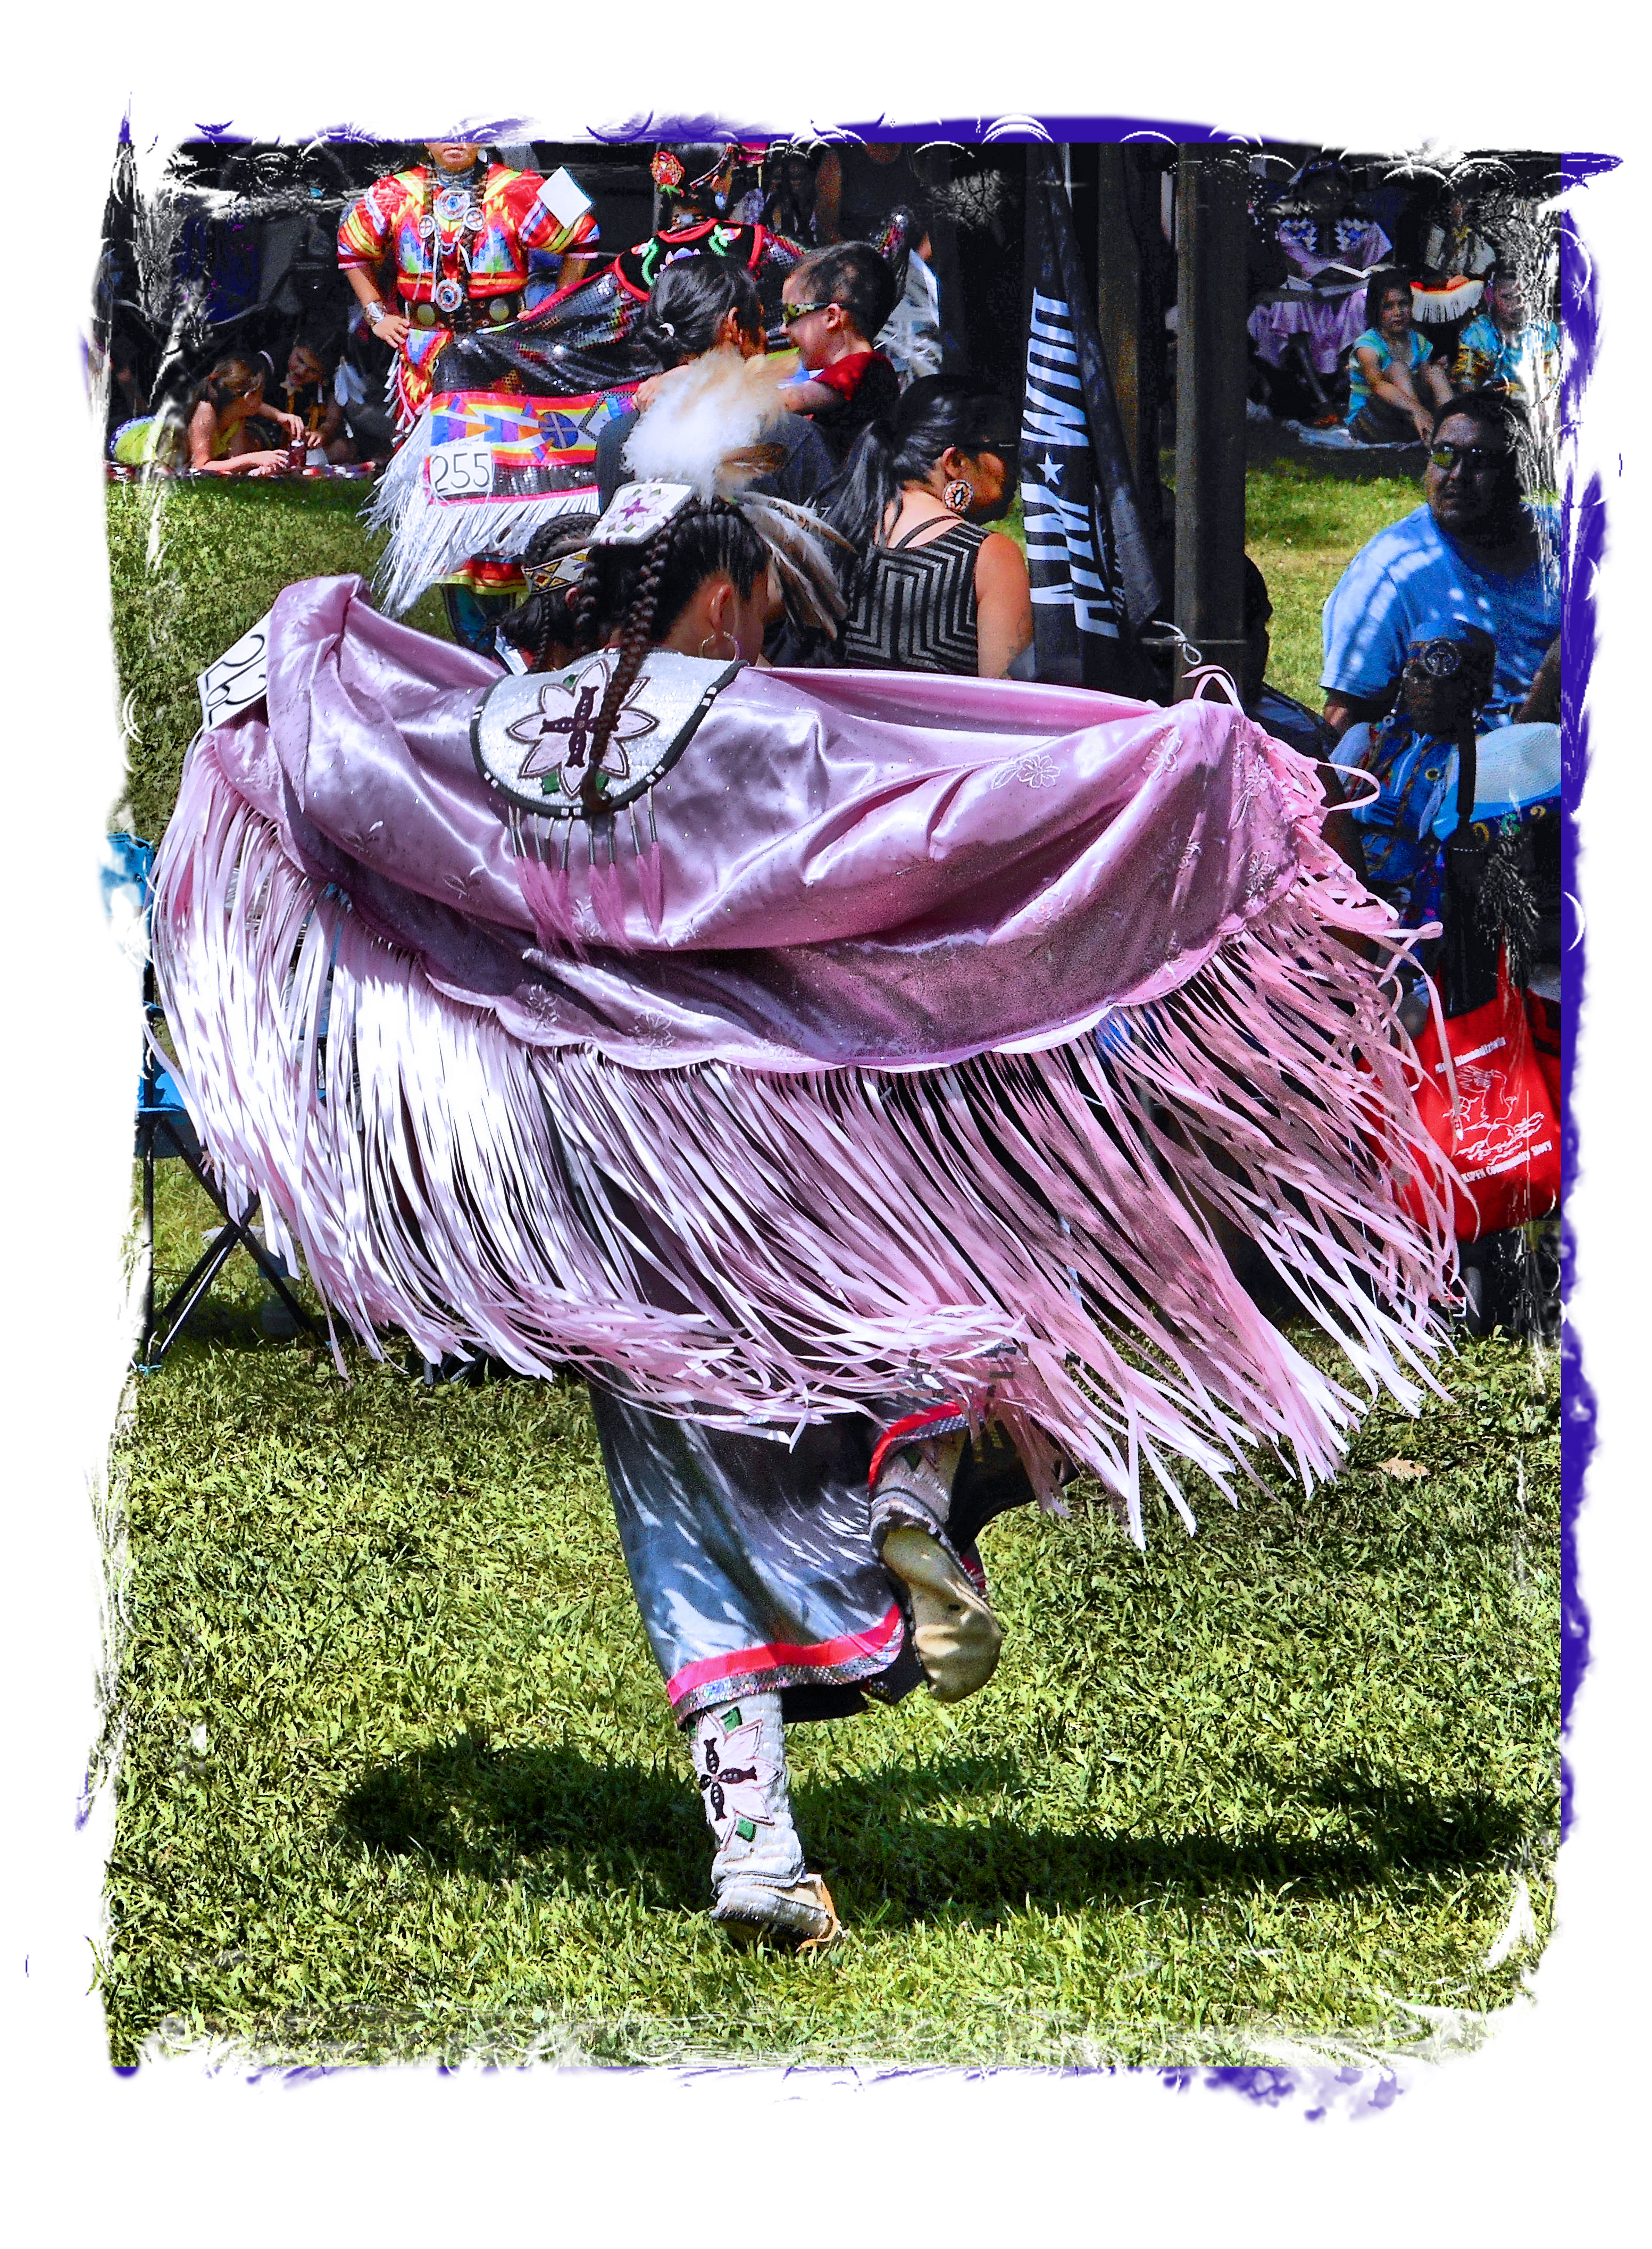 Kettle Point Pow wow